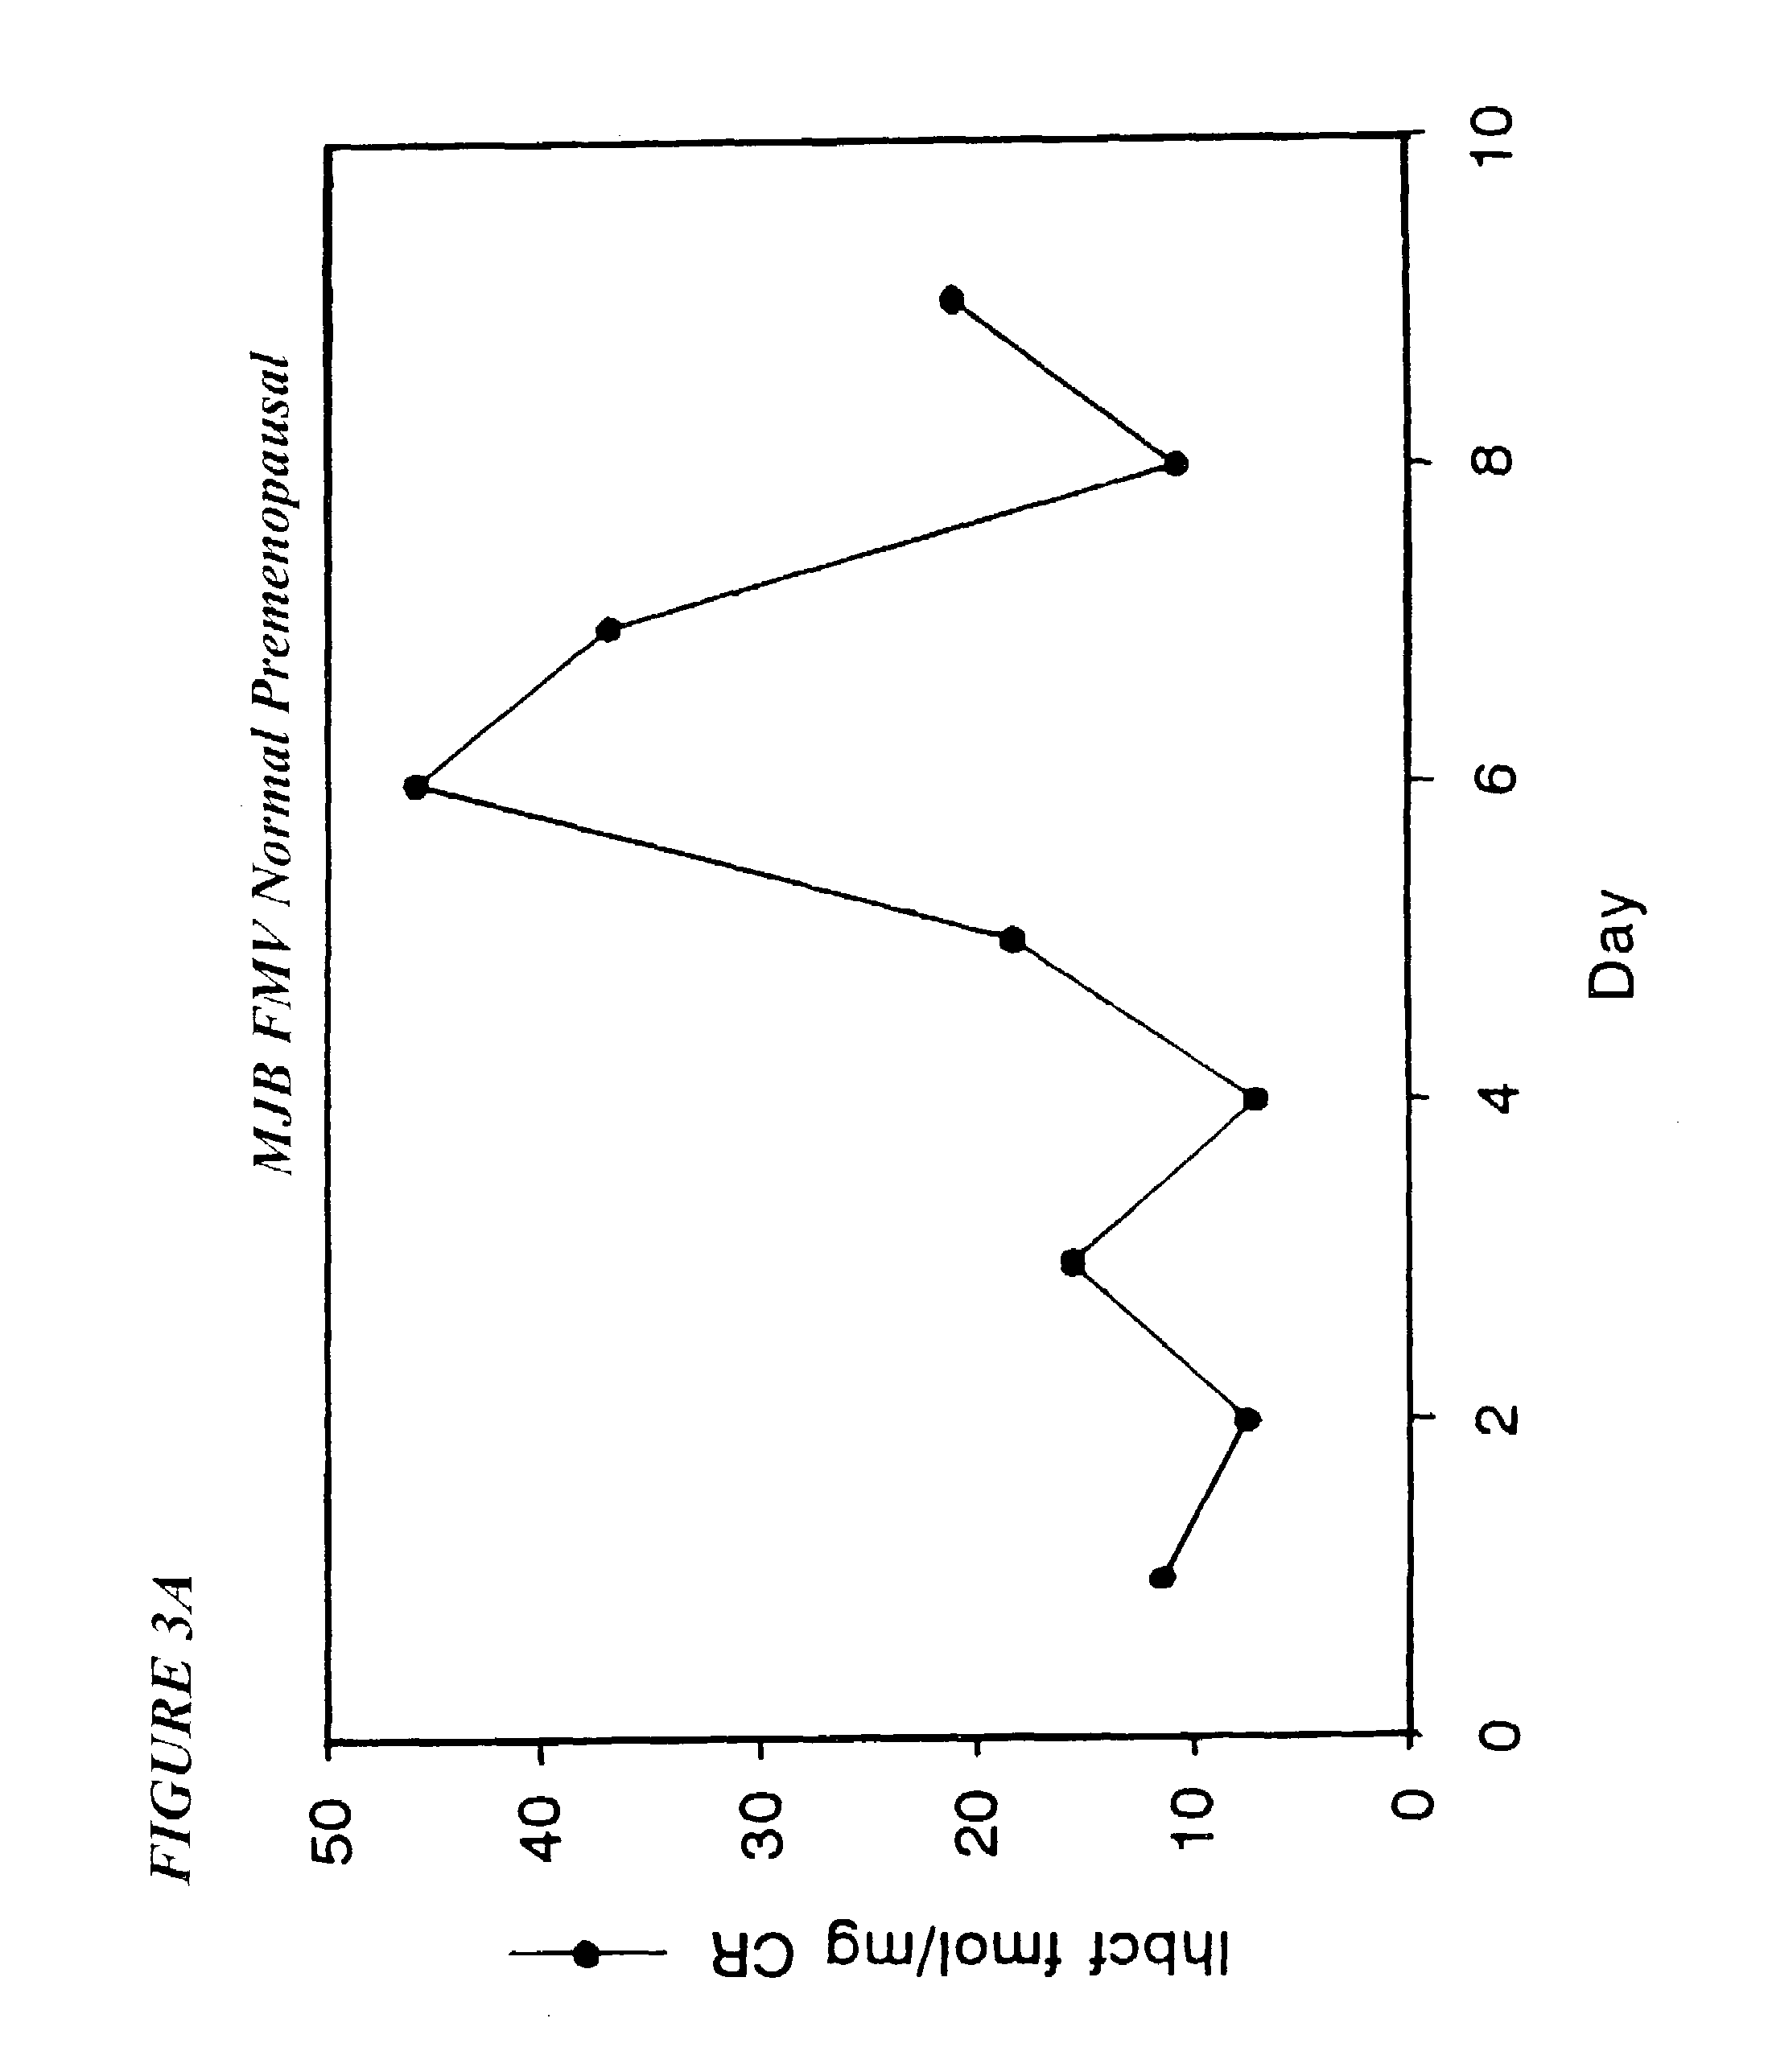 Methods and reagents for determining the amount of hLHbeta core fragment in a sample